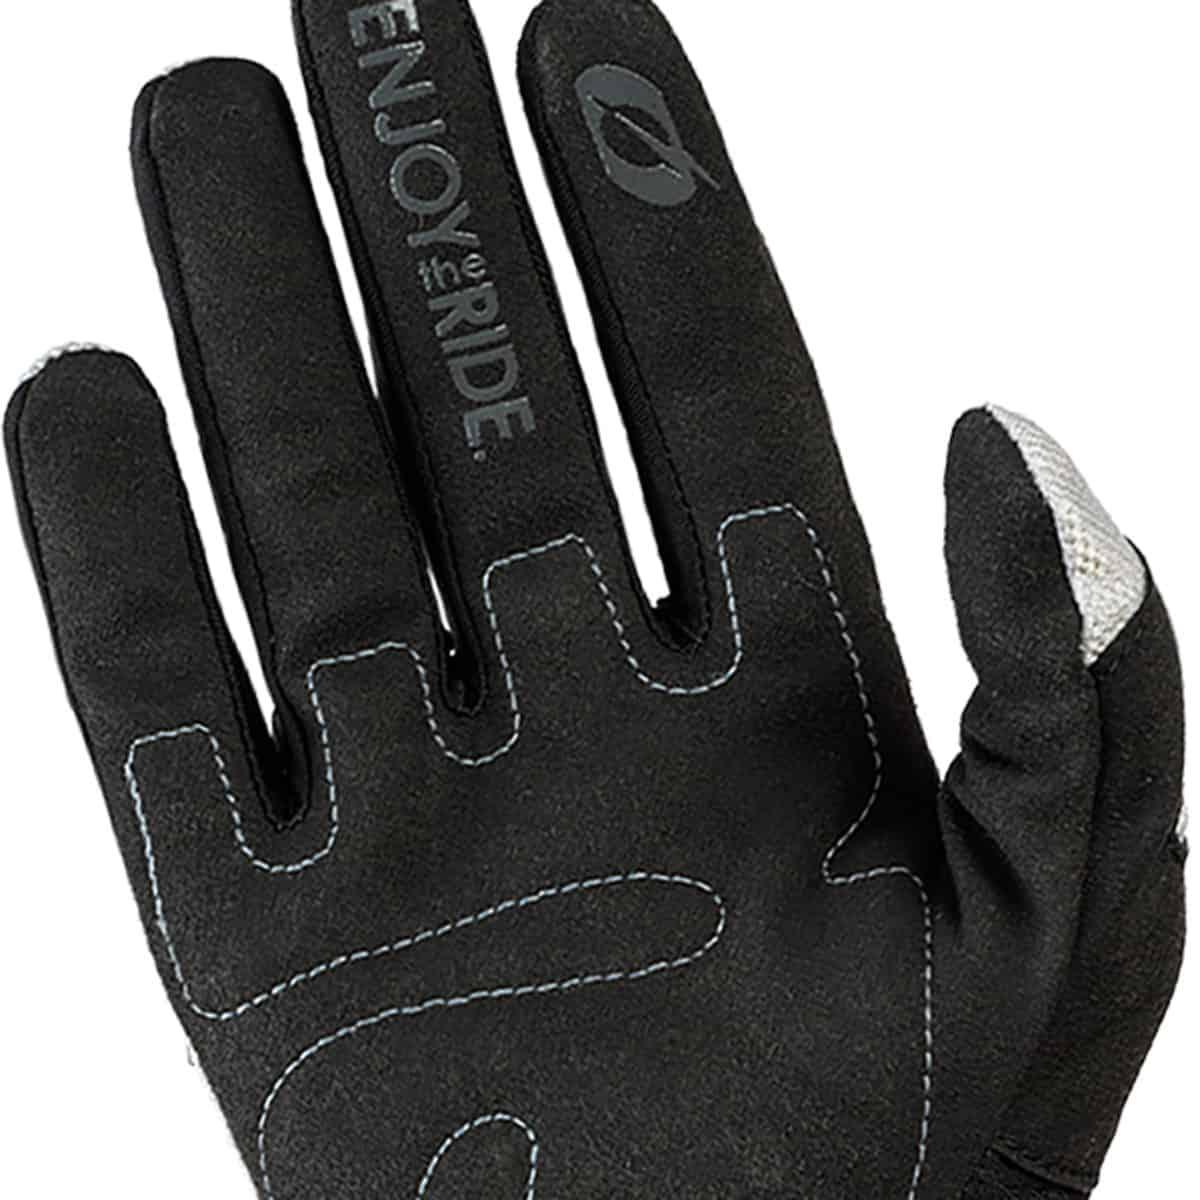 Comfortable off road riding gloves-grey-3